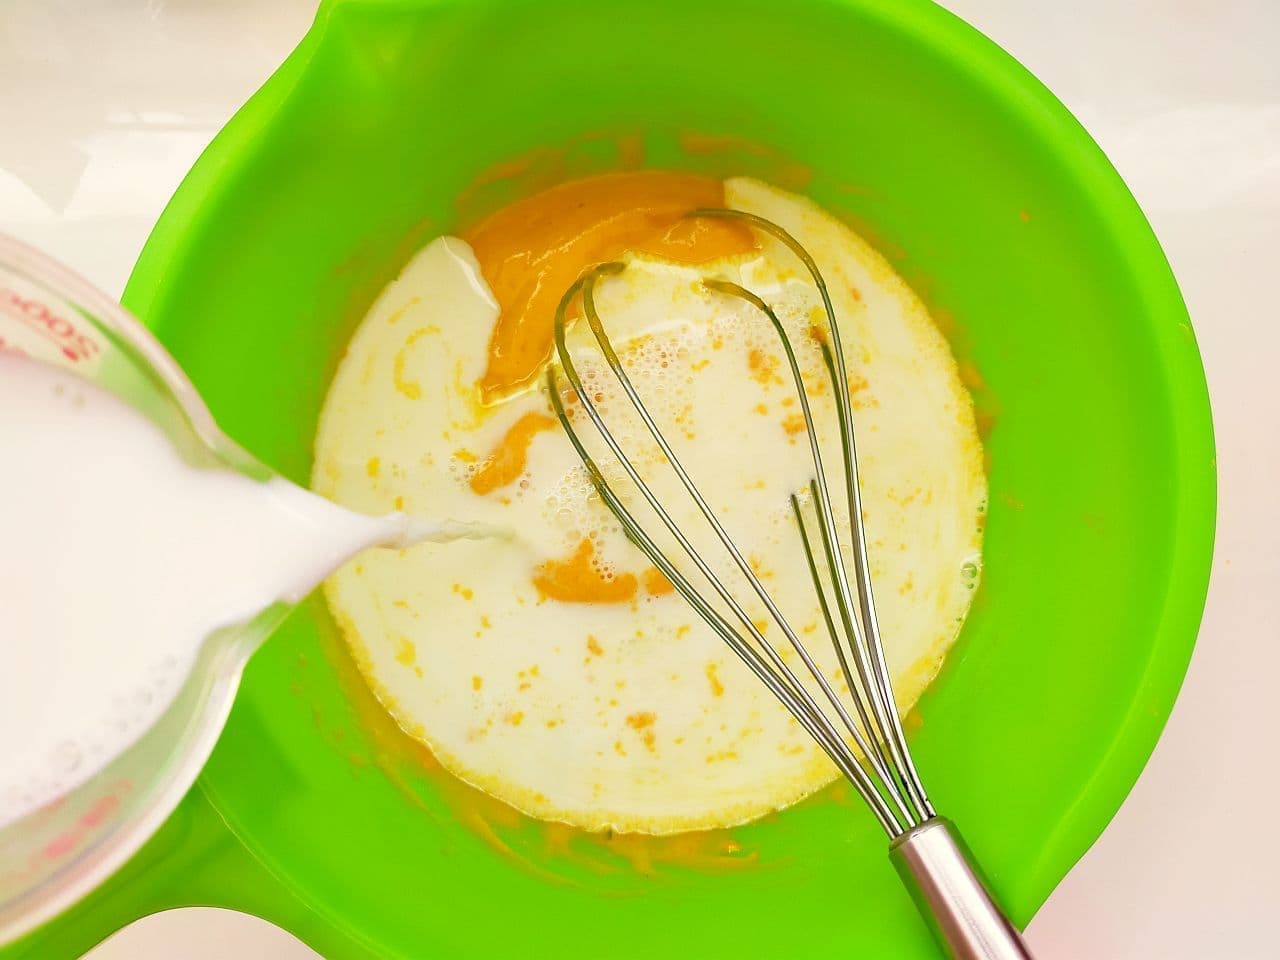 Easy pumpkin pudding recipe in the microwave